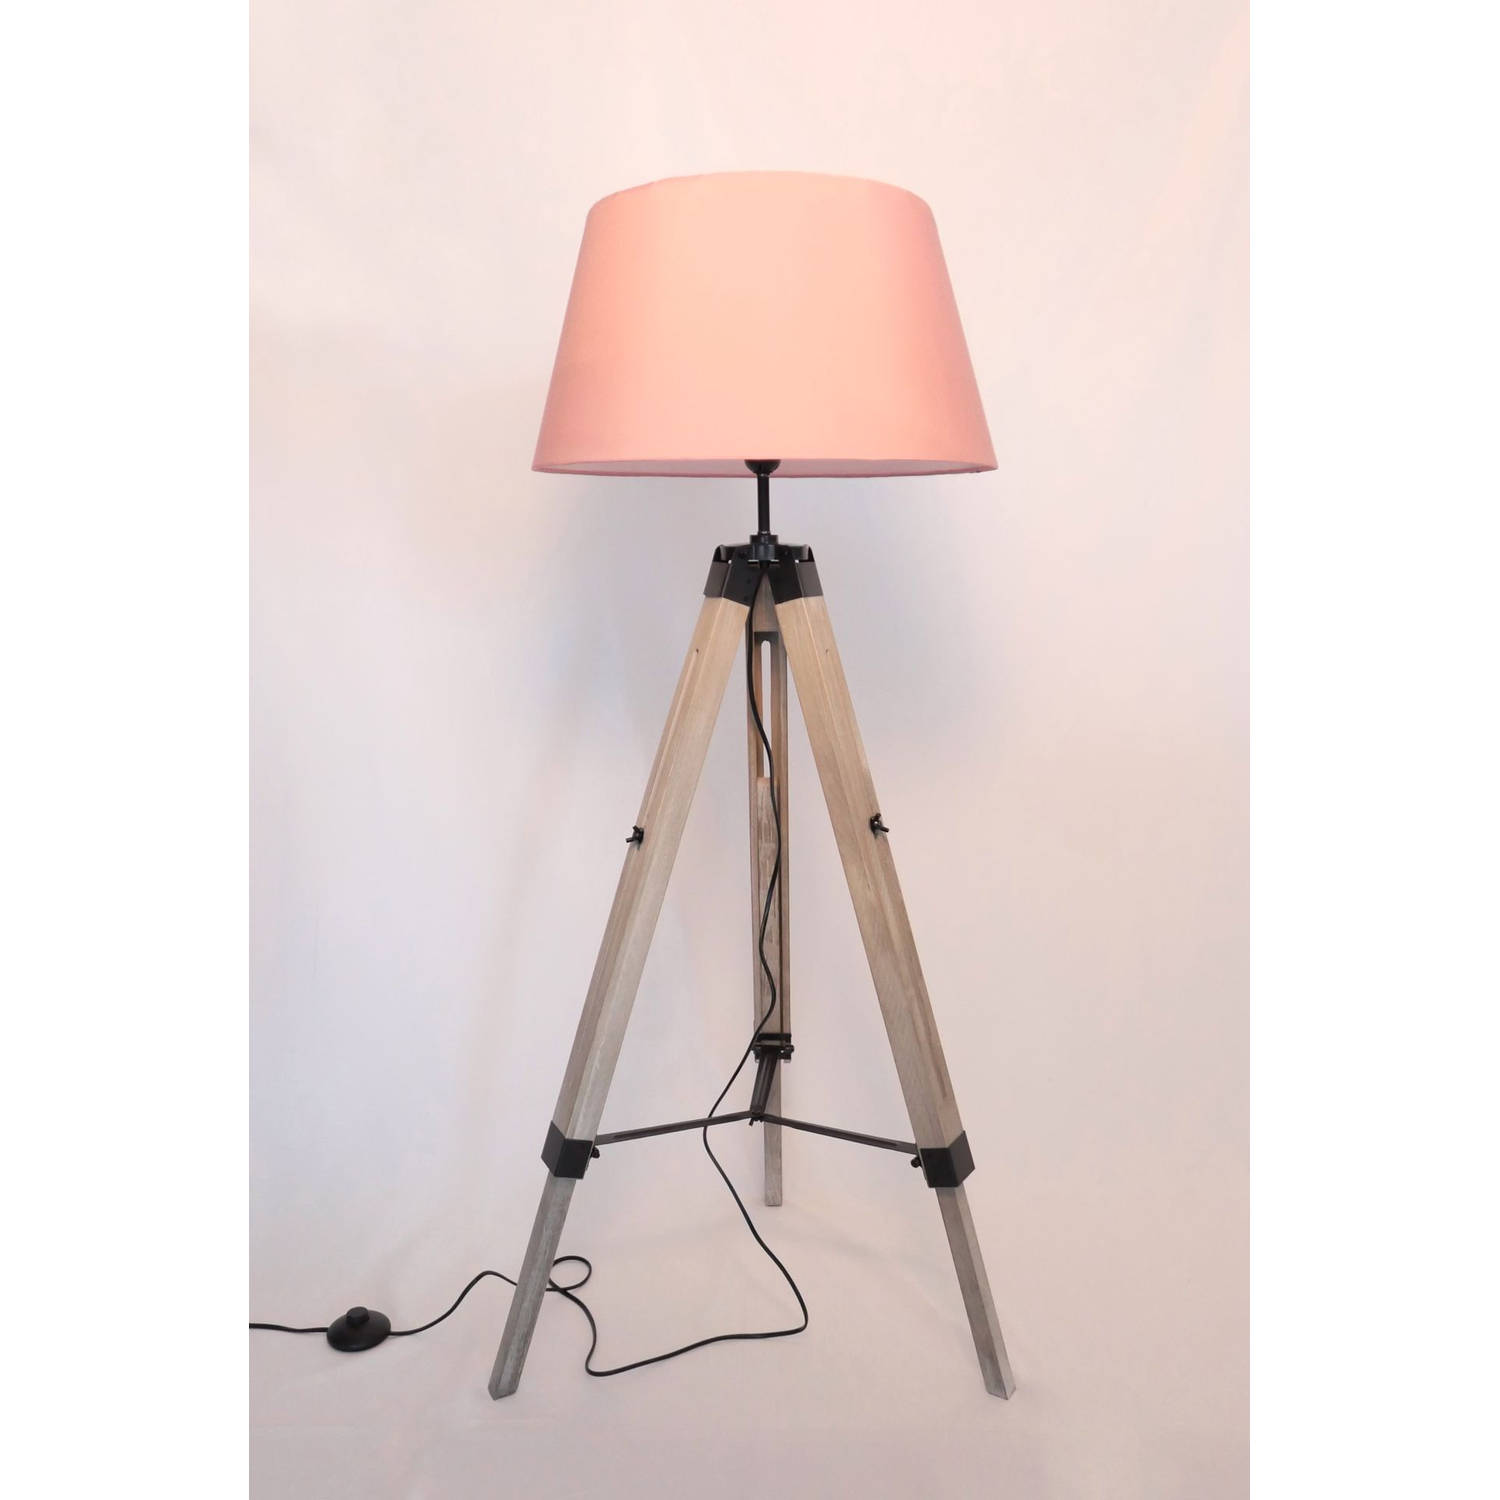 Maxxhome Vloerlamp Lilly Leeslamp Driepoot Hout -145 Cm E27 Led 40w Rose